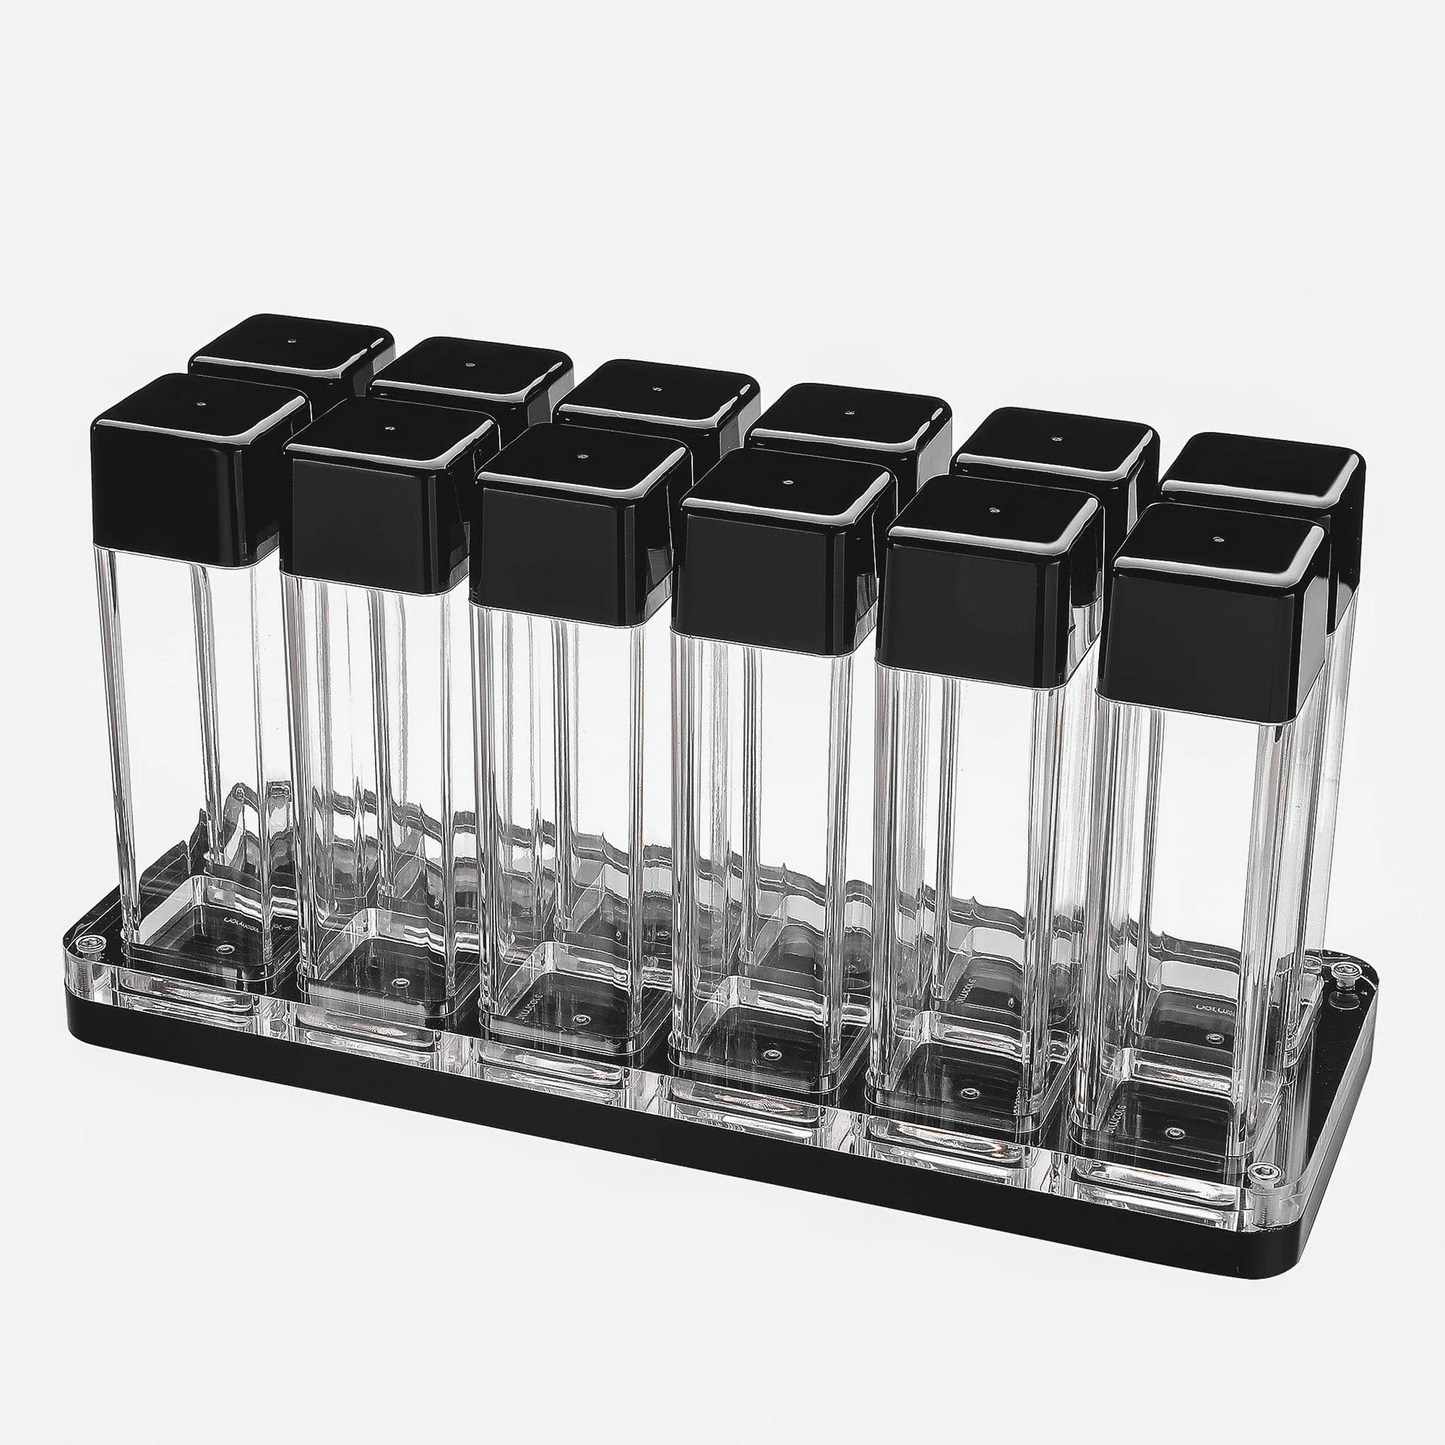 Normcore Coffee Bean Cellar with Stand, Store, Display & Dose, Airtight, Perfect for single dosing